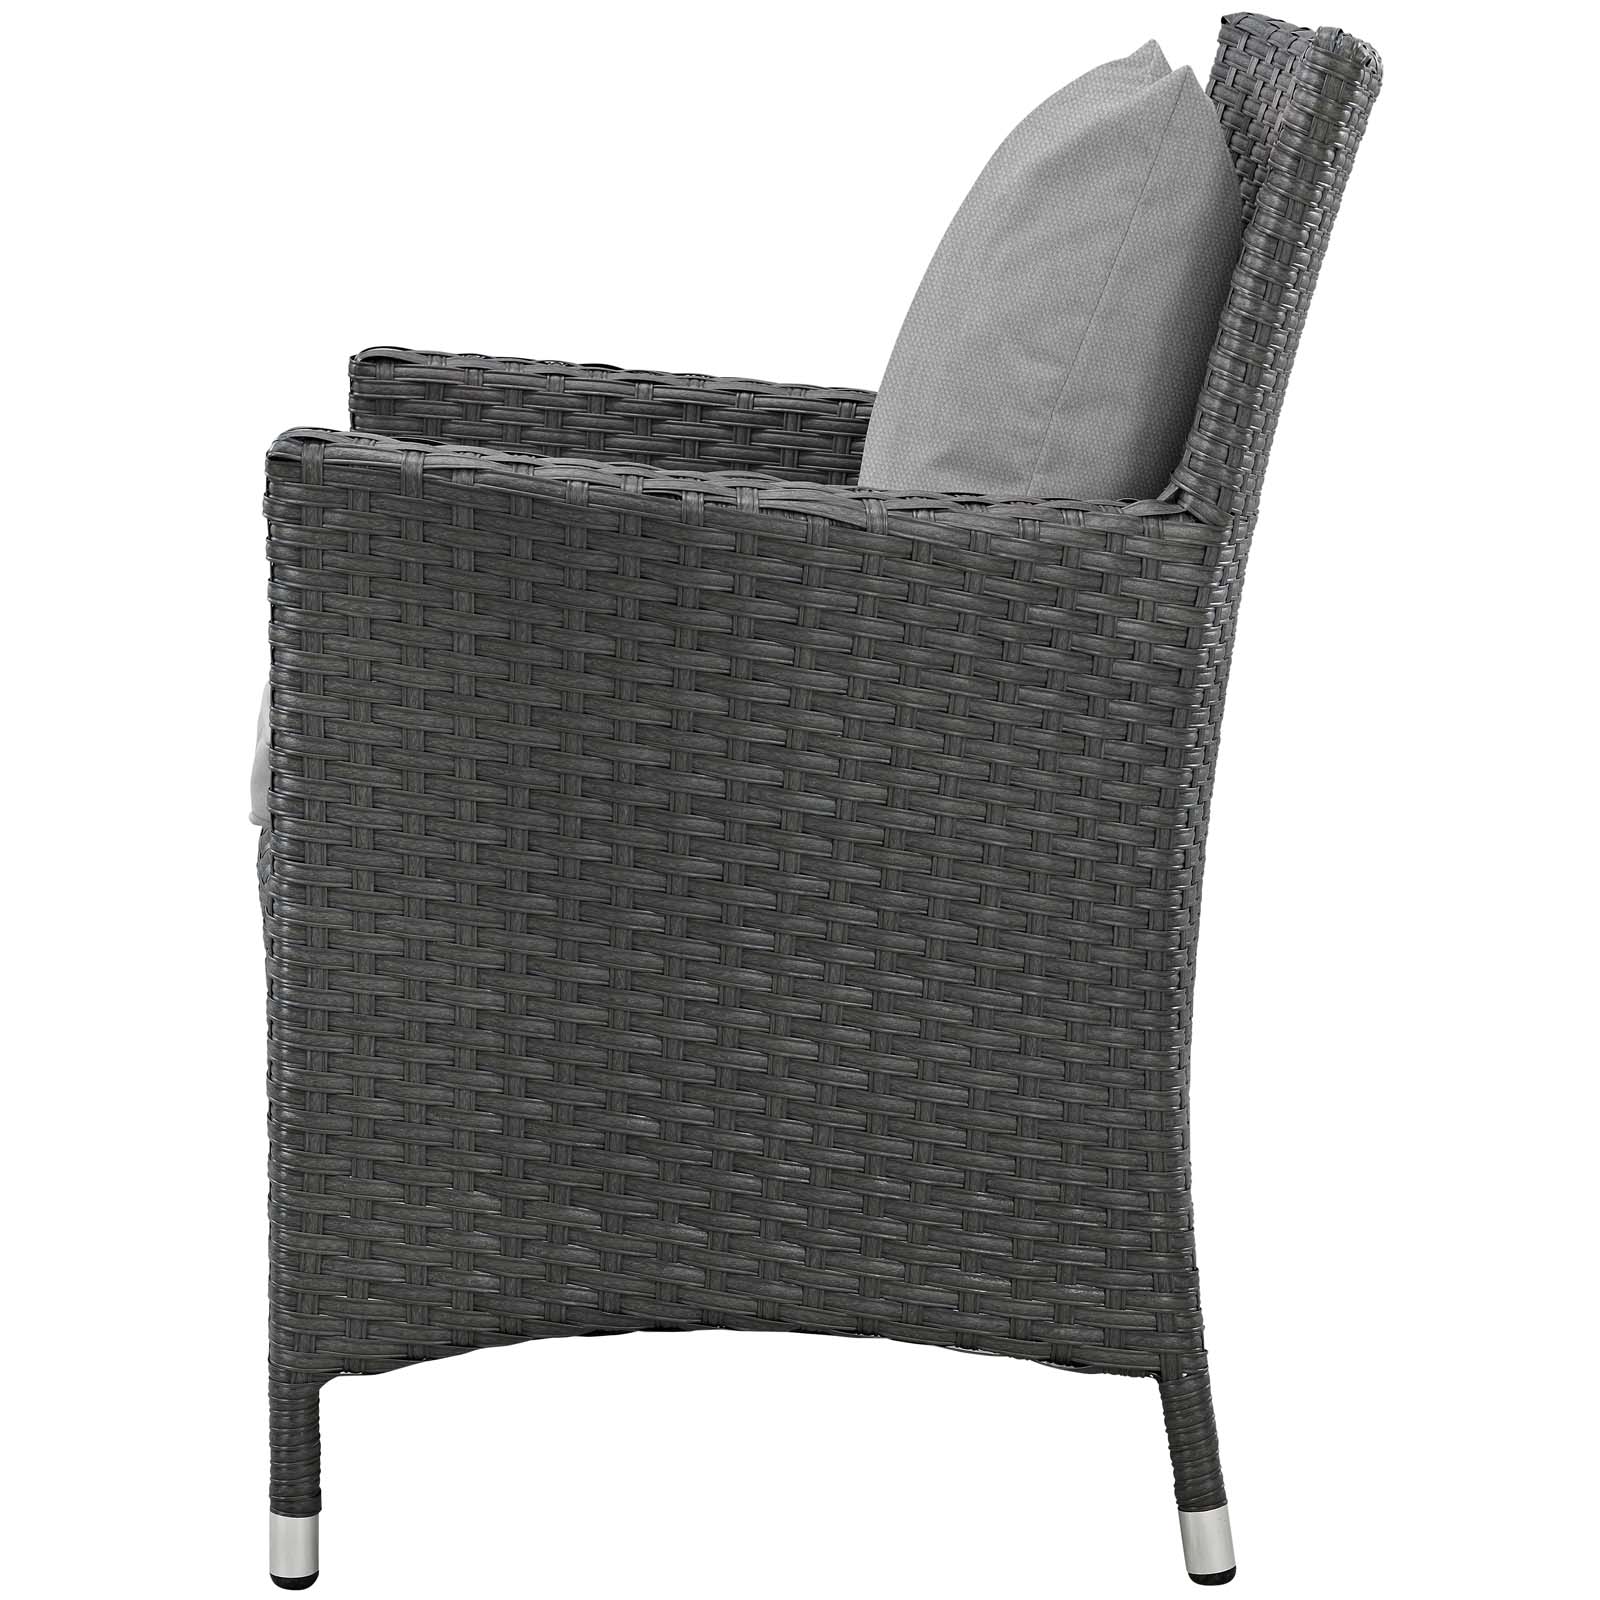 Modern Contemporary Urban Outdoor Patio Balcony Garden Furniture Side Dining Chair and Table Set, Sunbrella Rattan Wicker, Grey Gray - image 4 of 6